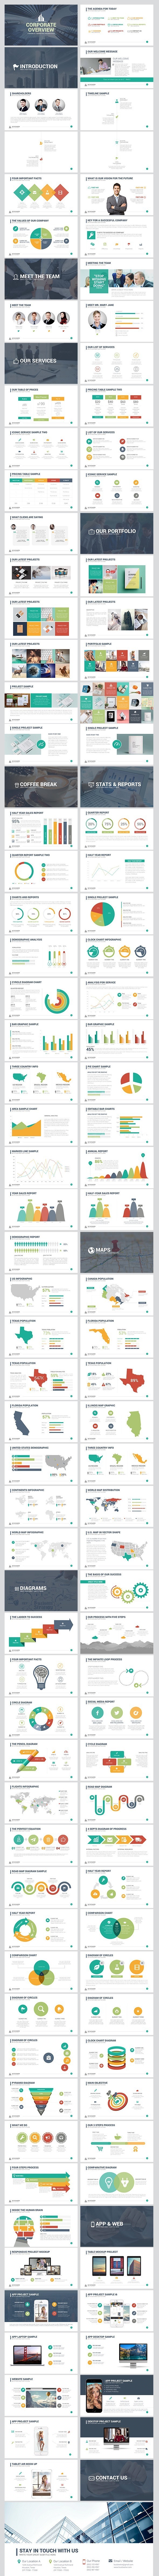 Corporate Overview Powerpoint Template